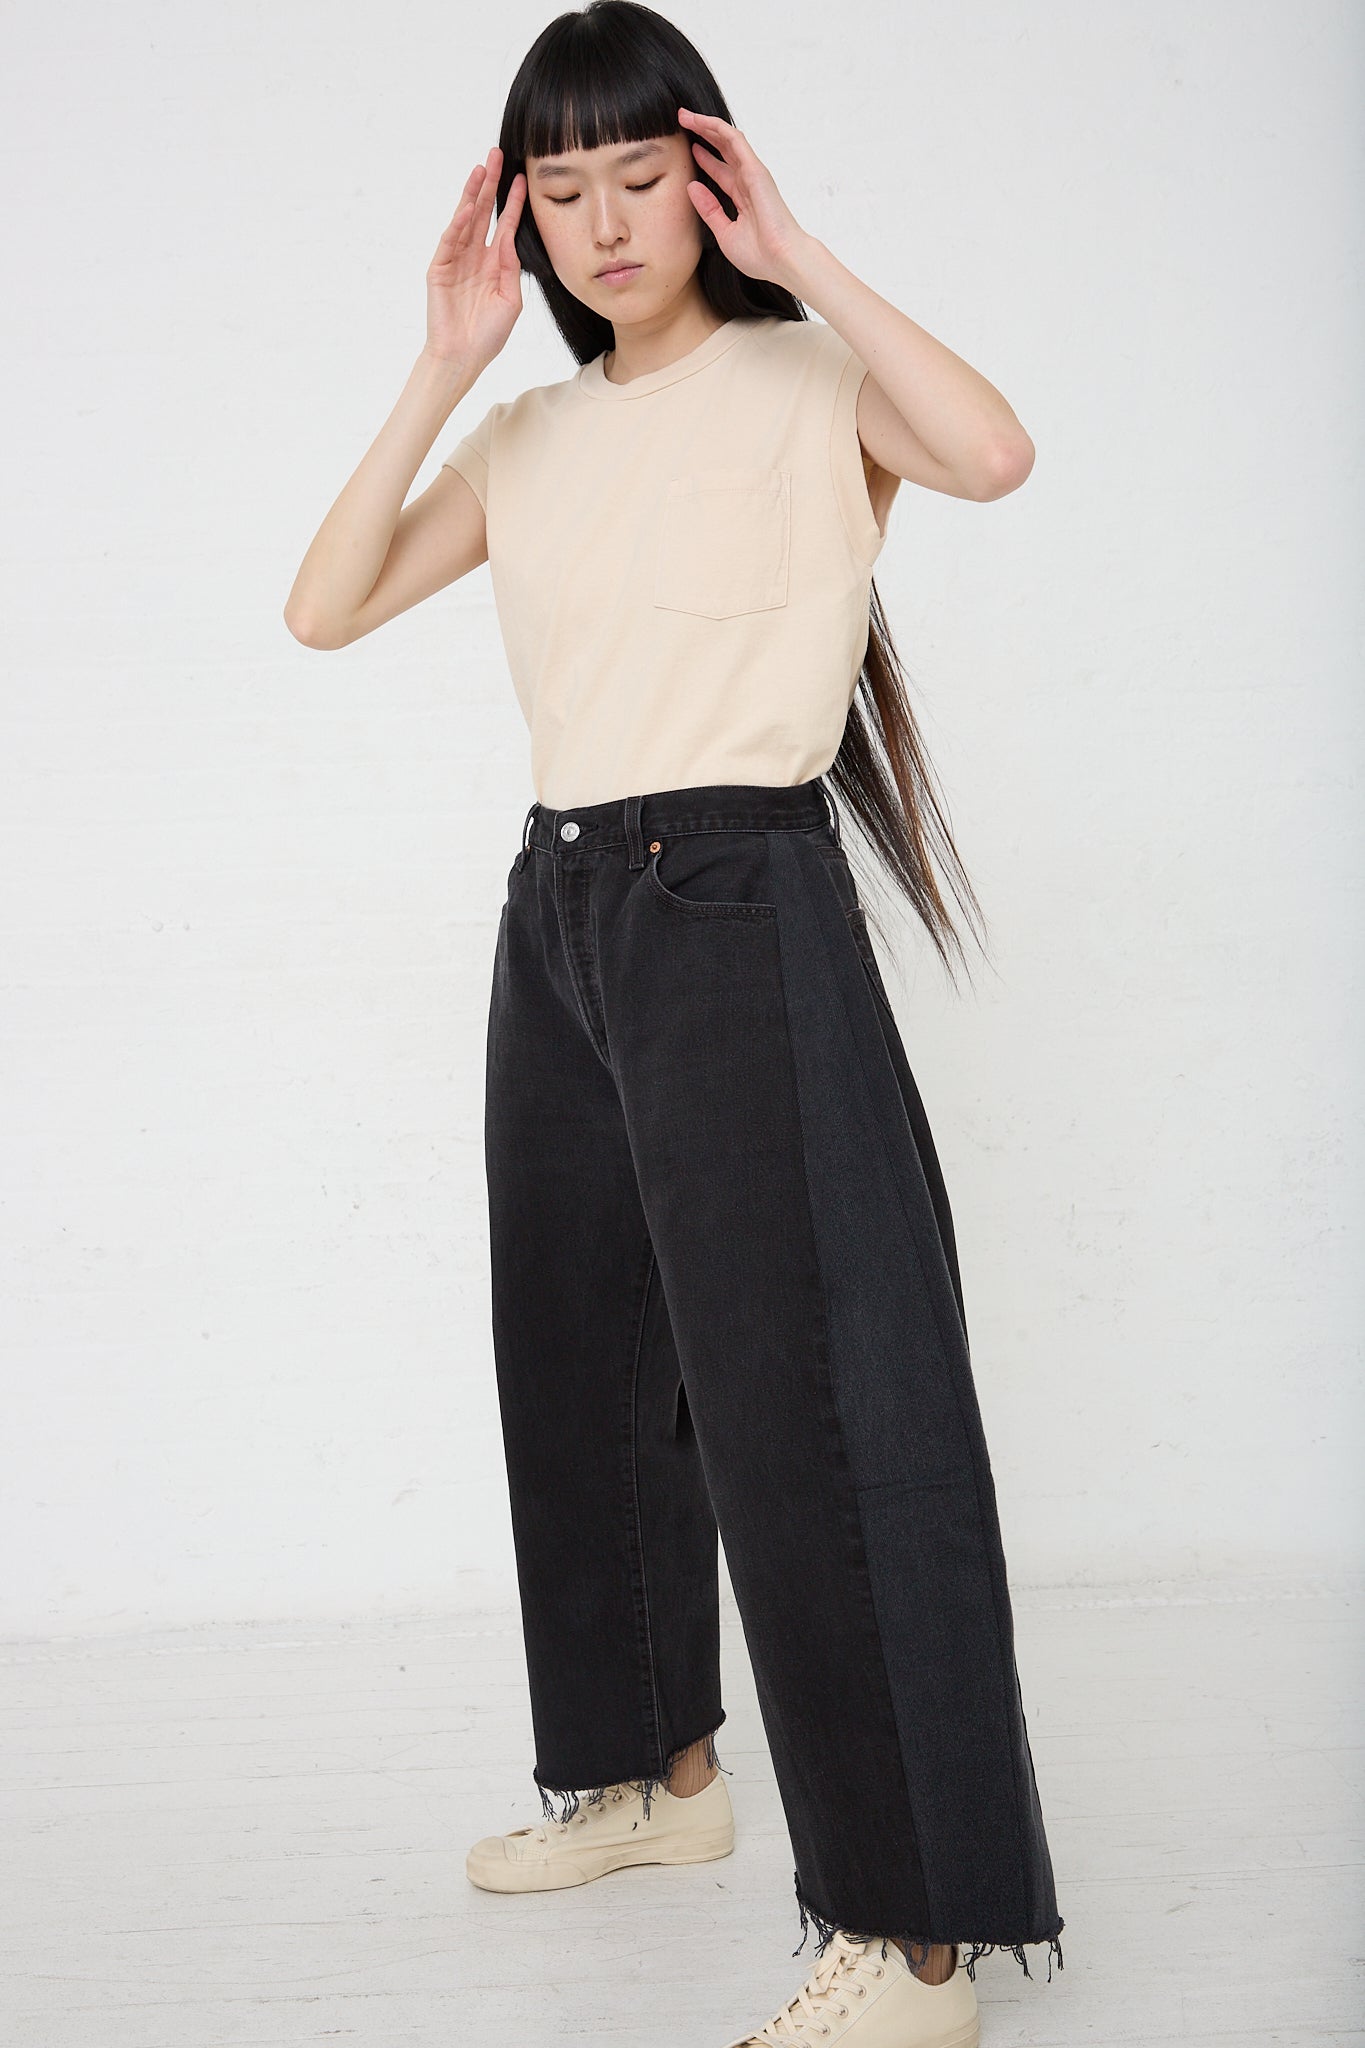 A woman with long hair wearing B Sides' Lasso in Vintage Black denim pants and a beige shirt.